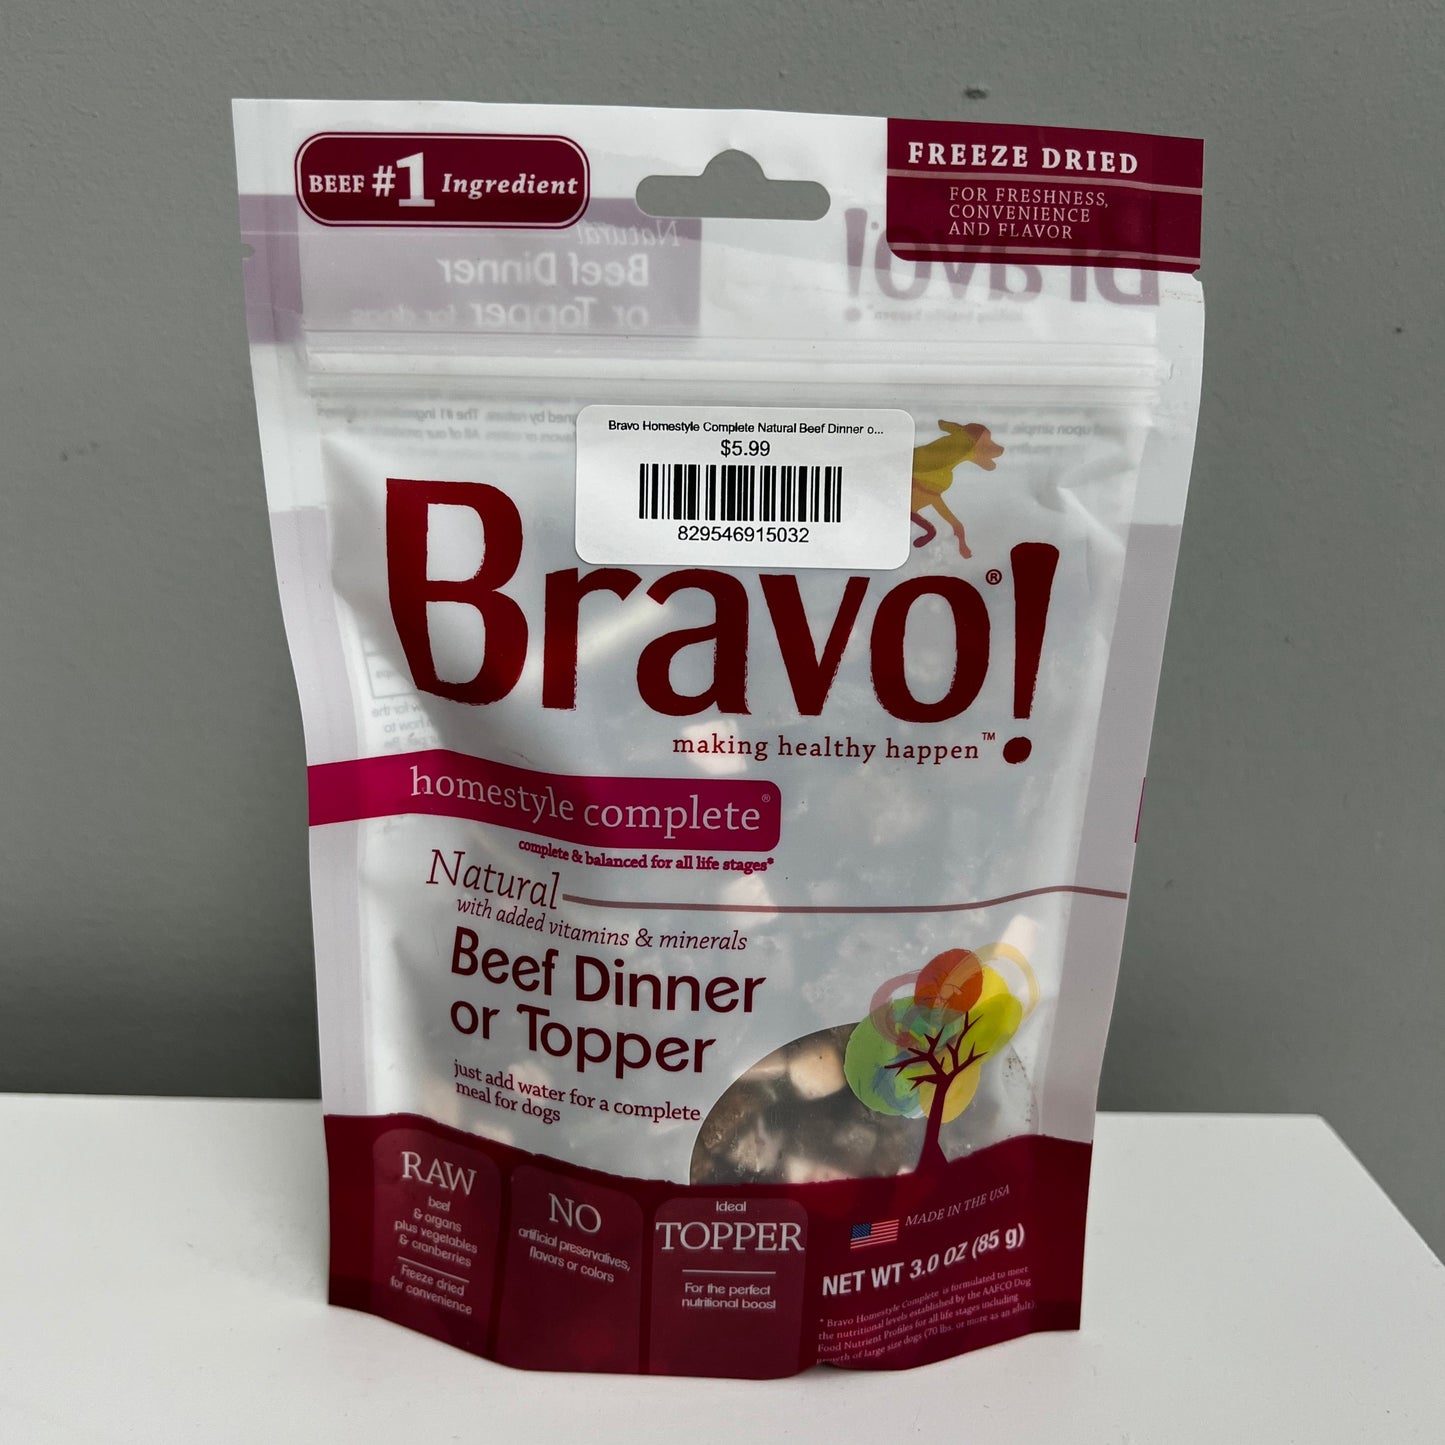 Bravo Homestyle Complete Natural Beef Dinner or Topper 3oz